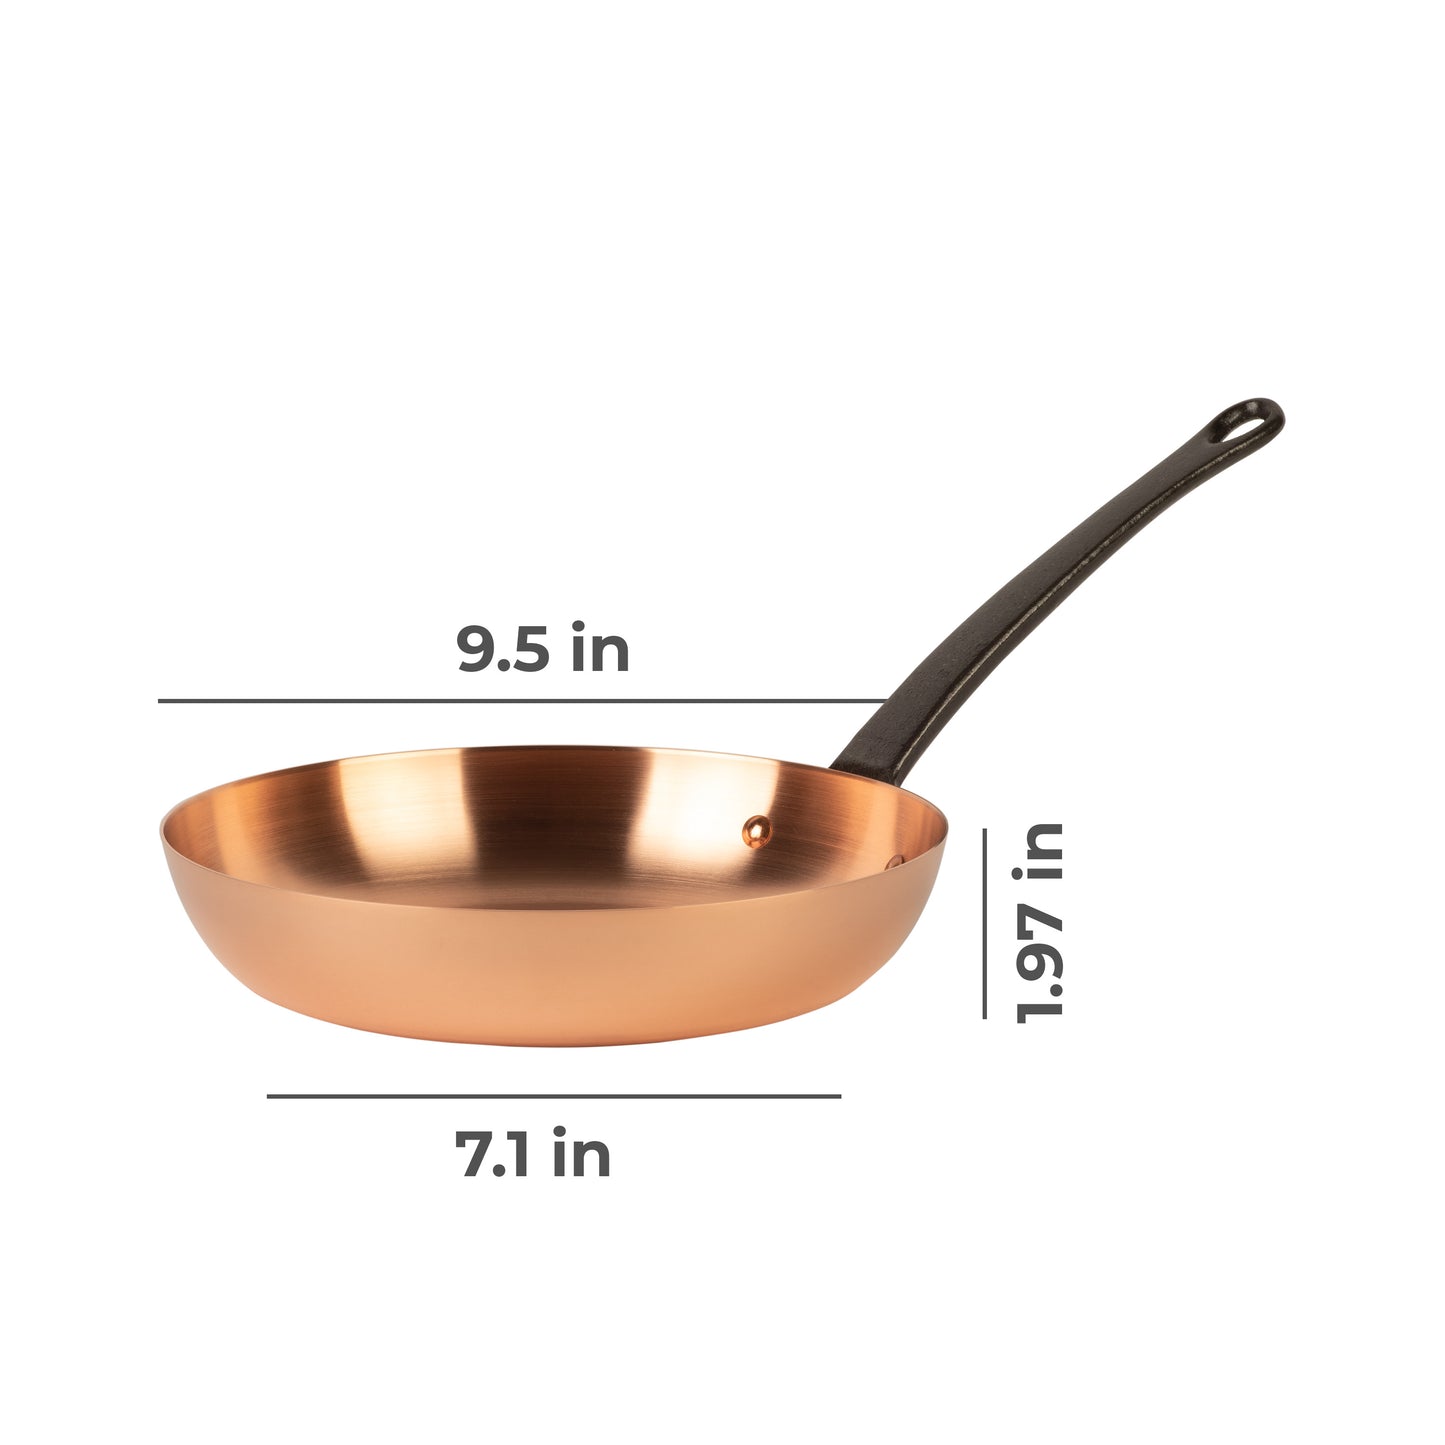 Pure copper frying pan without coating, Ø 9.5 in